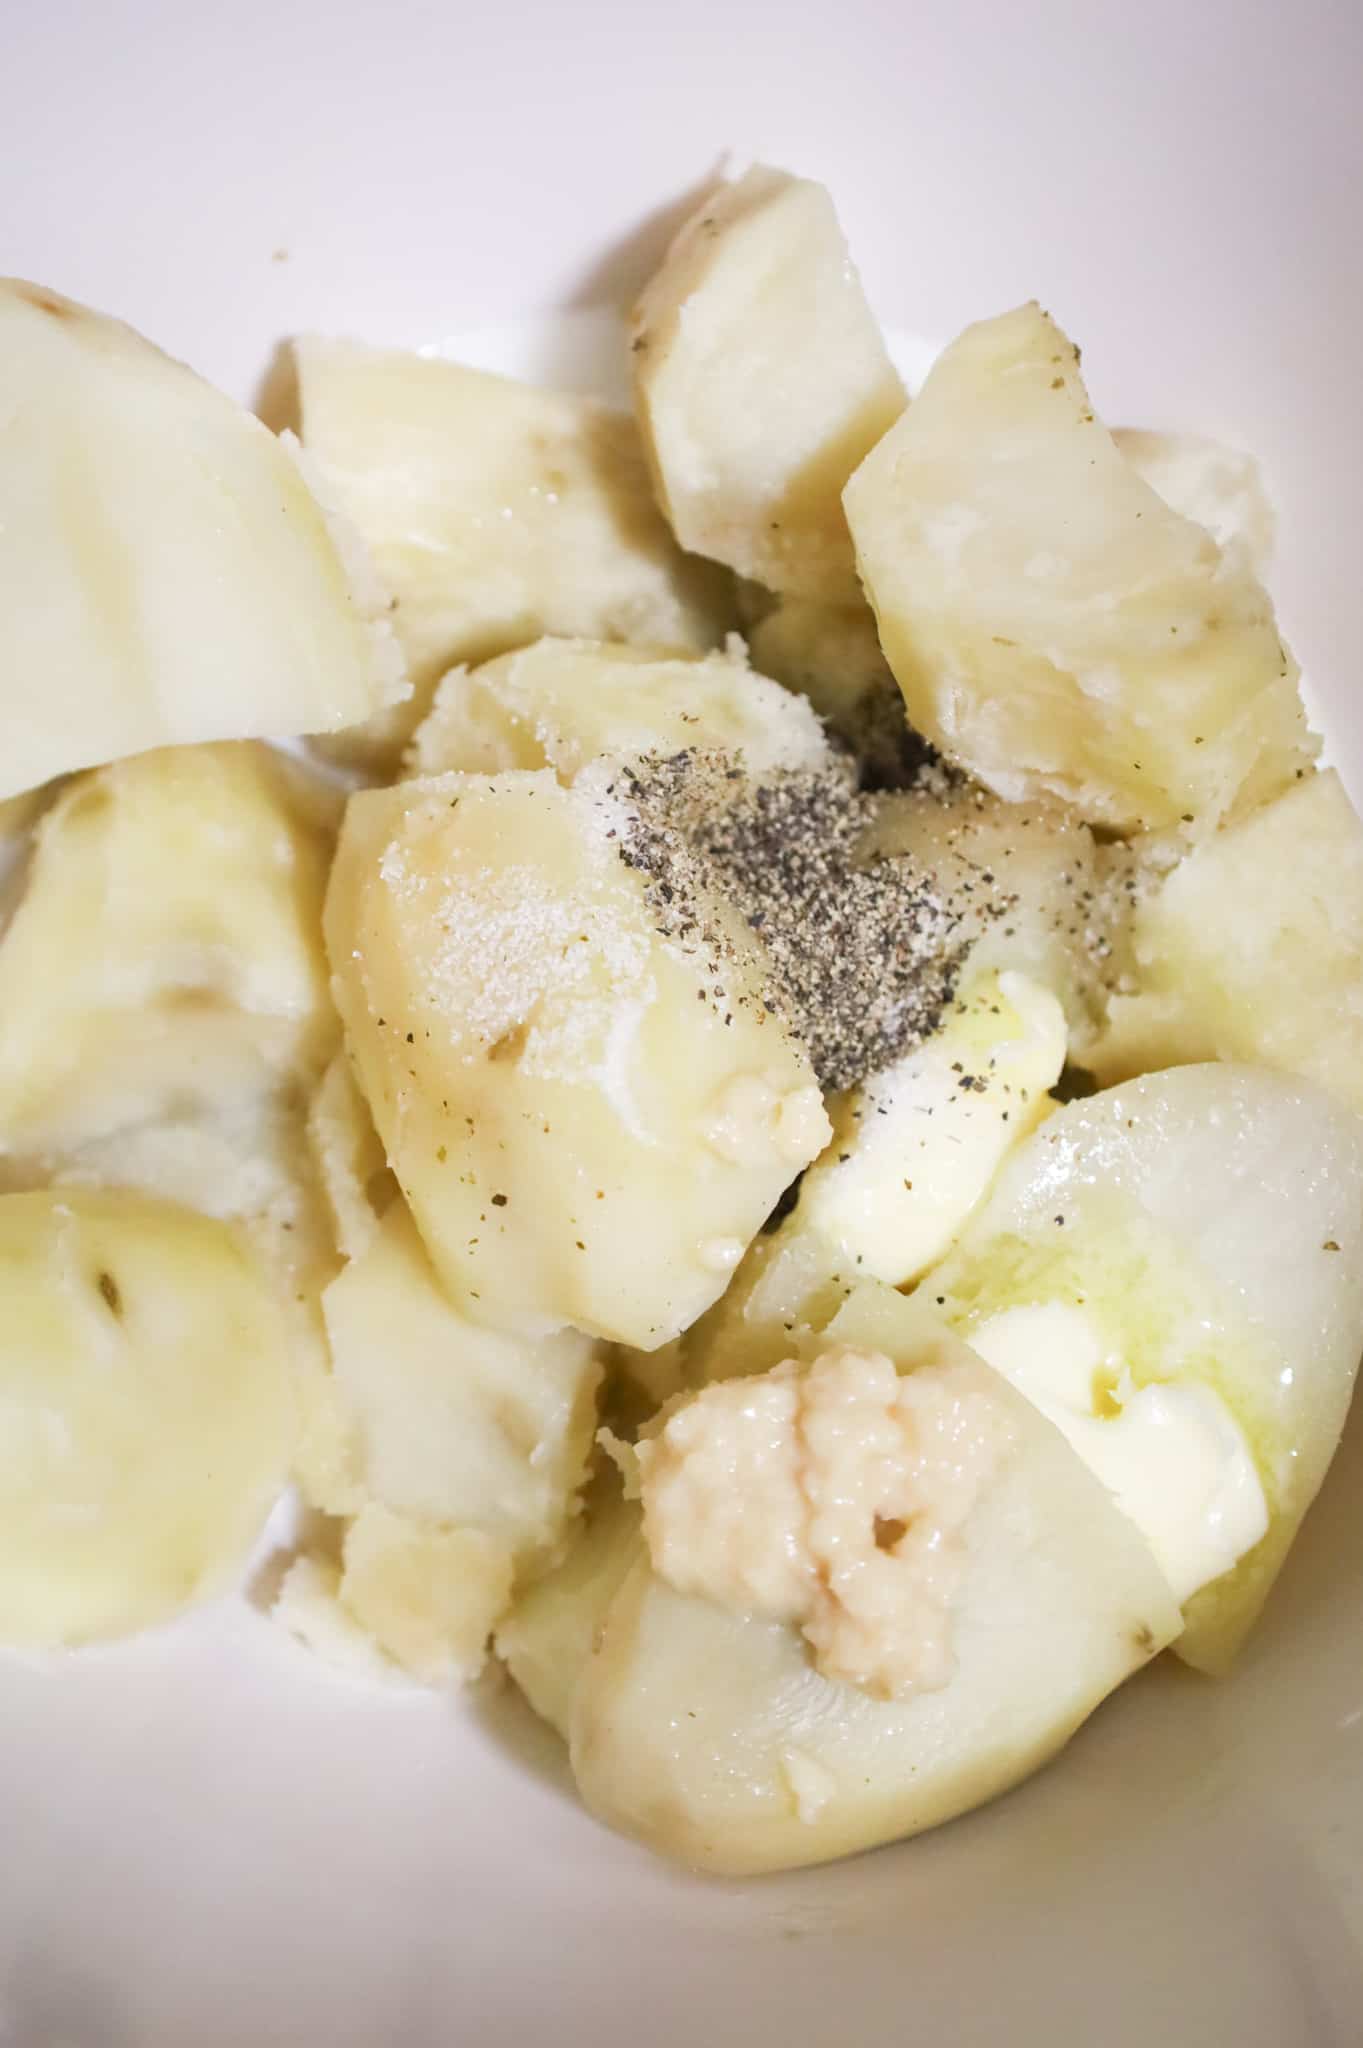 salt, pepper, garlic puree, butter and milk on top of cooked potatoes in a mixing bowl